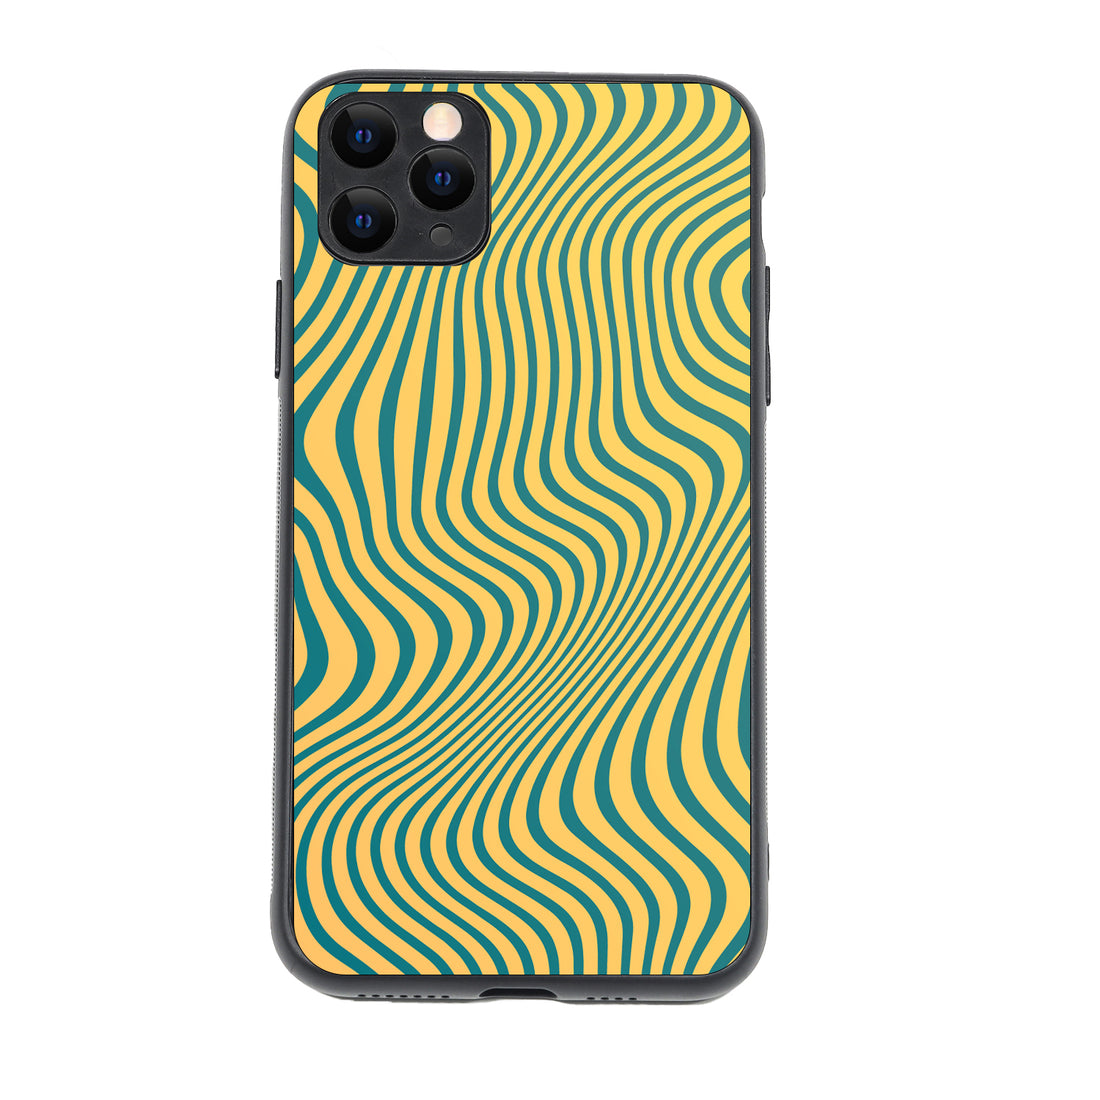 Green Strips Optical Illusion iPhone 11 Pro Max Case